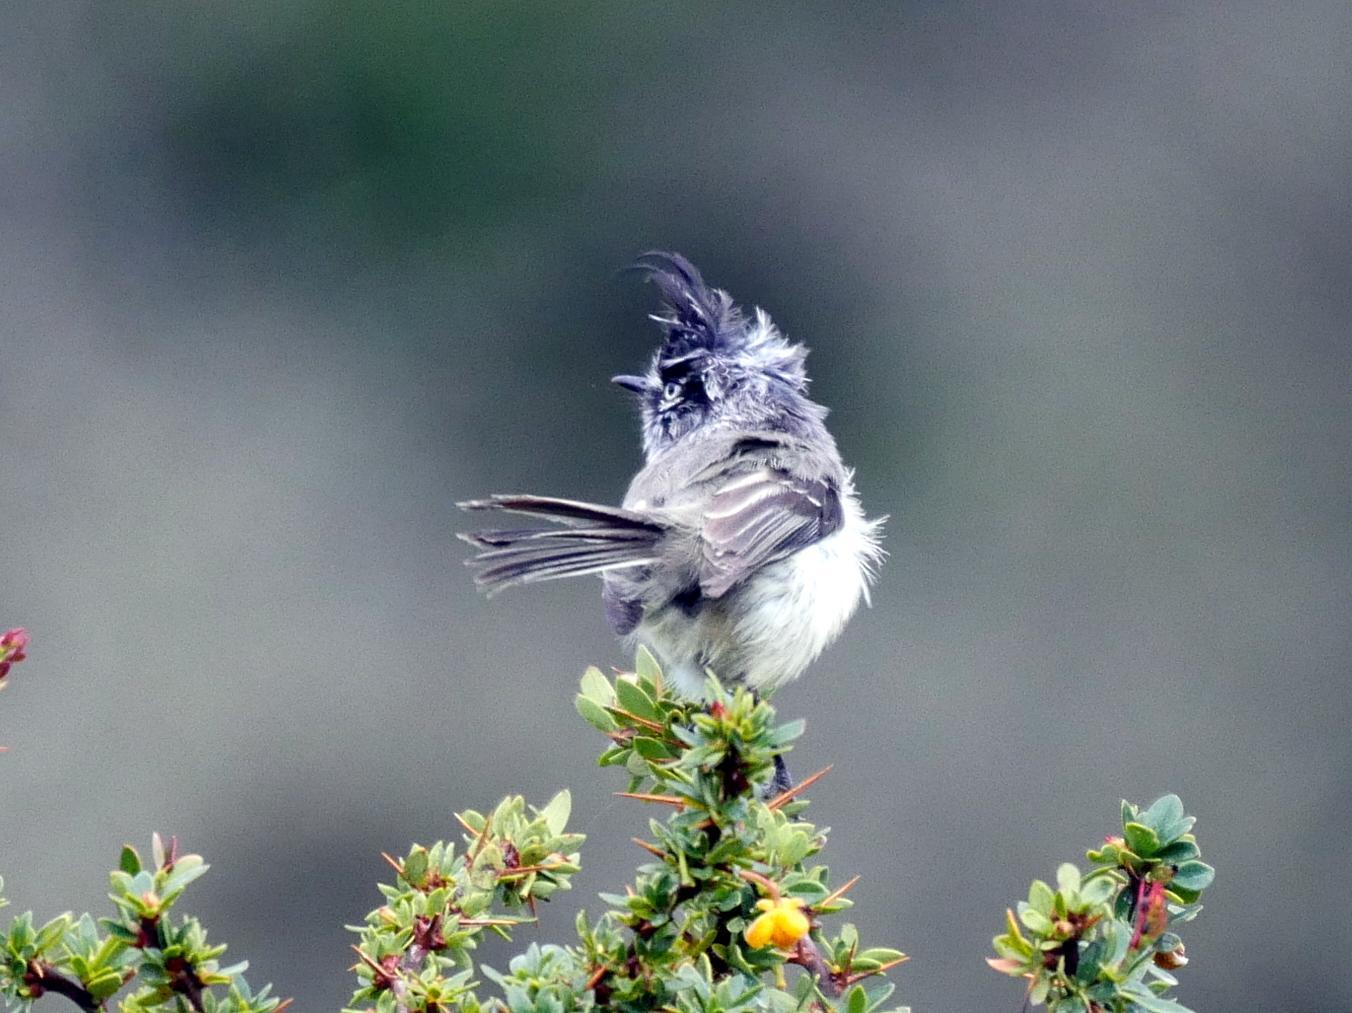 Tufted Tit-Tyrant Photo by Peter Lowe